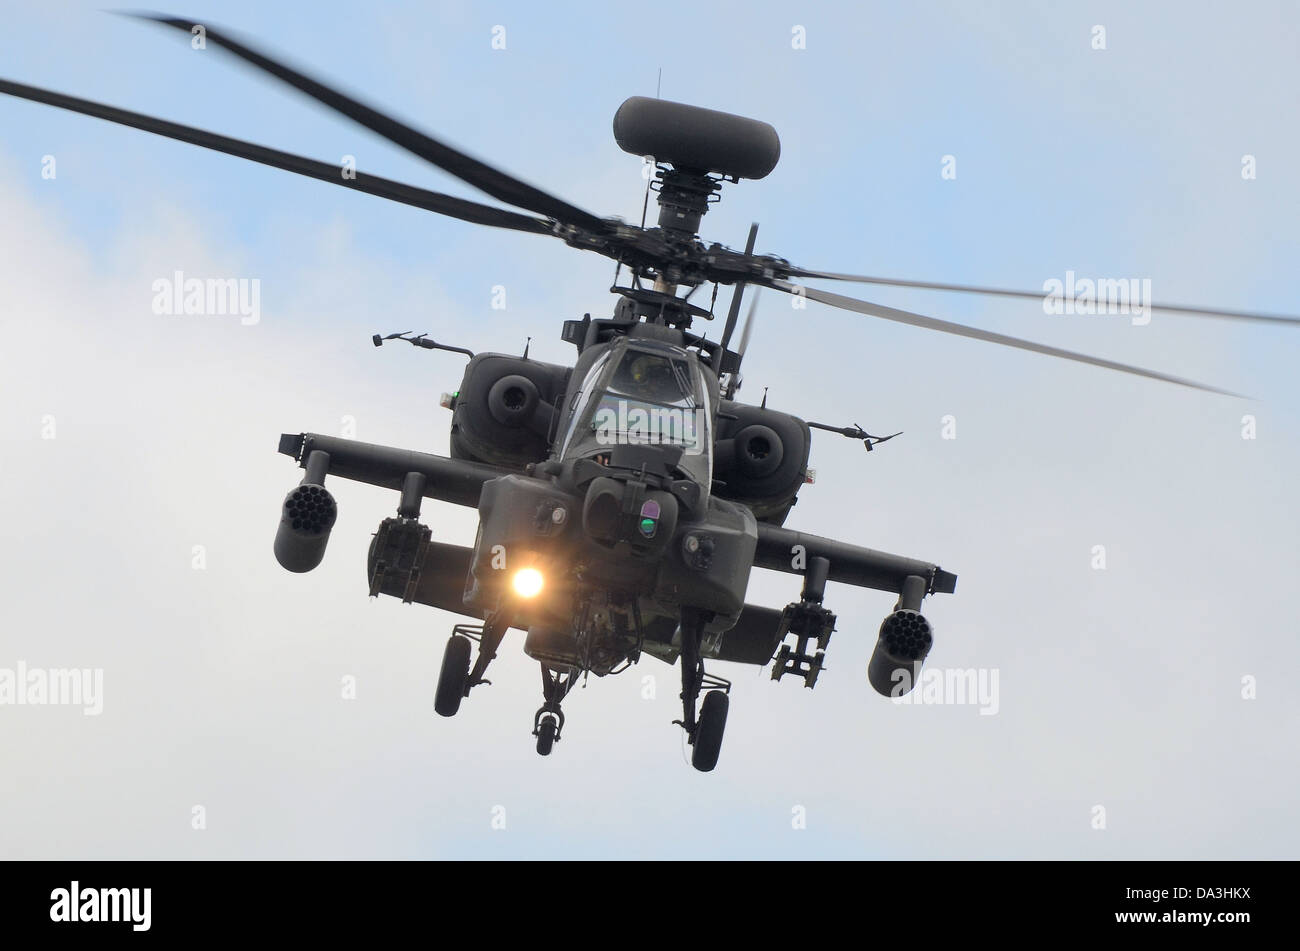 Boeing AH-64 Apache attack helicopter of the British Army. This head-on shot shows some of the armament. Space for copy Stock Photo